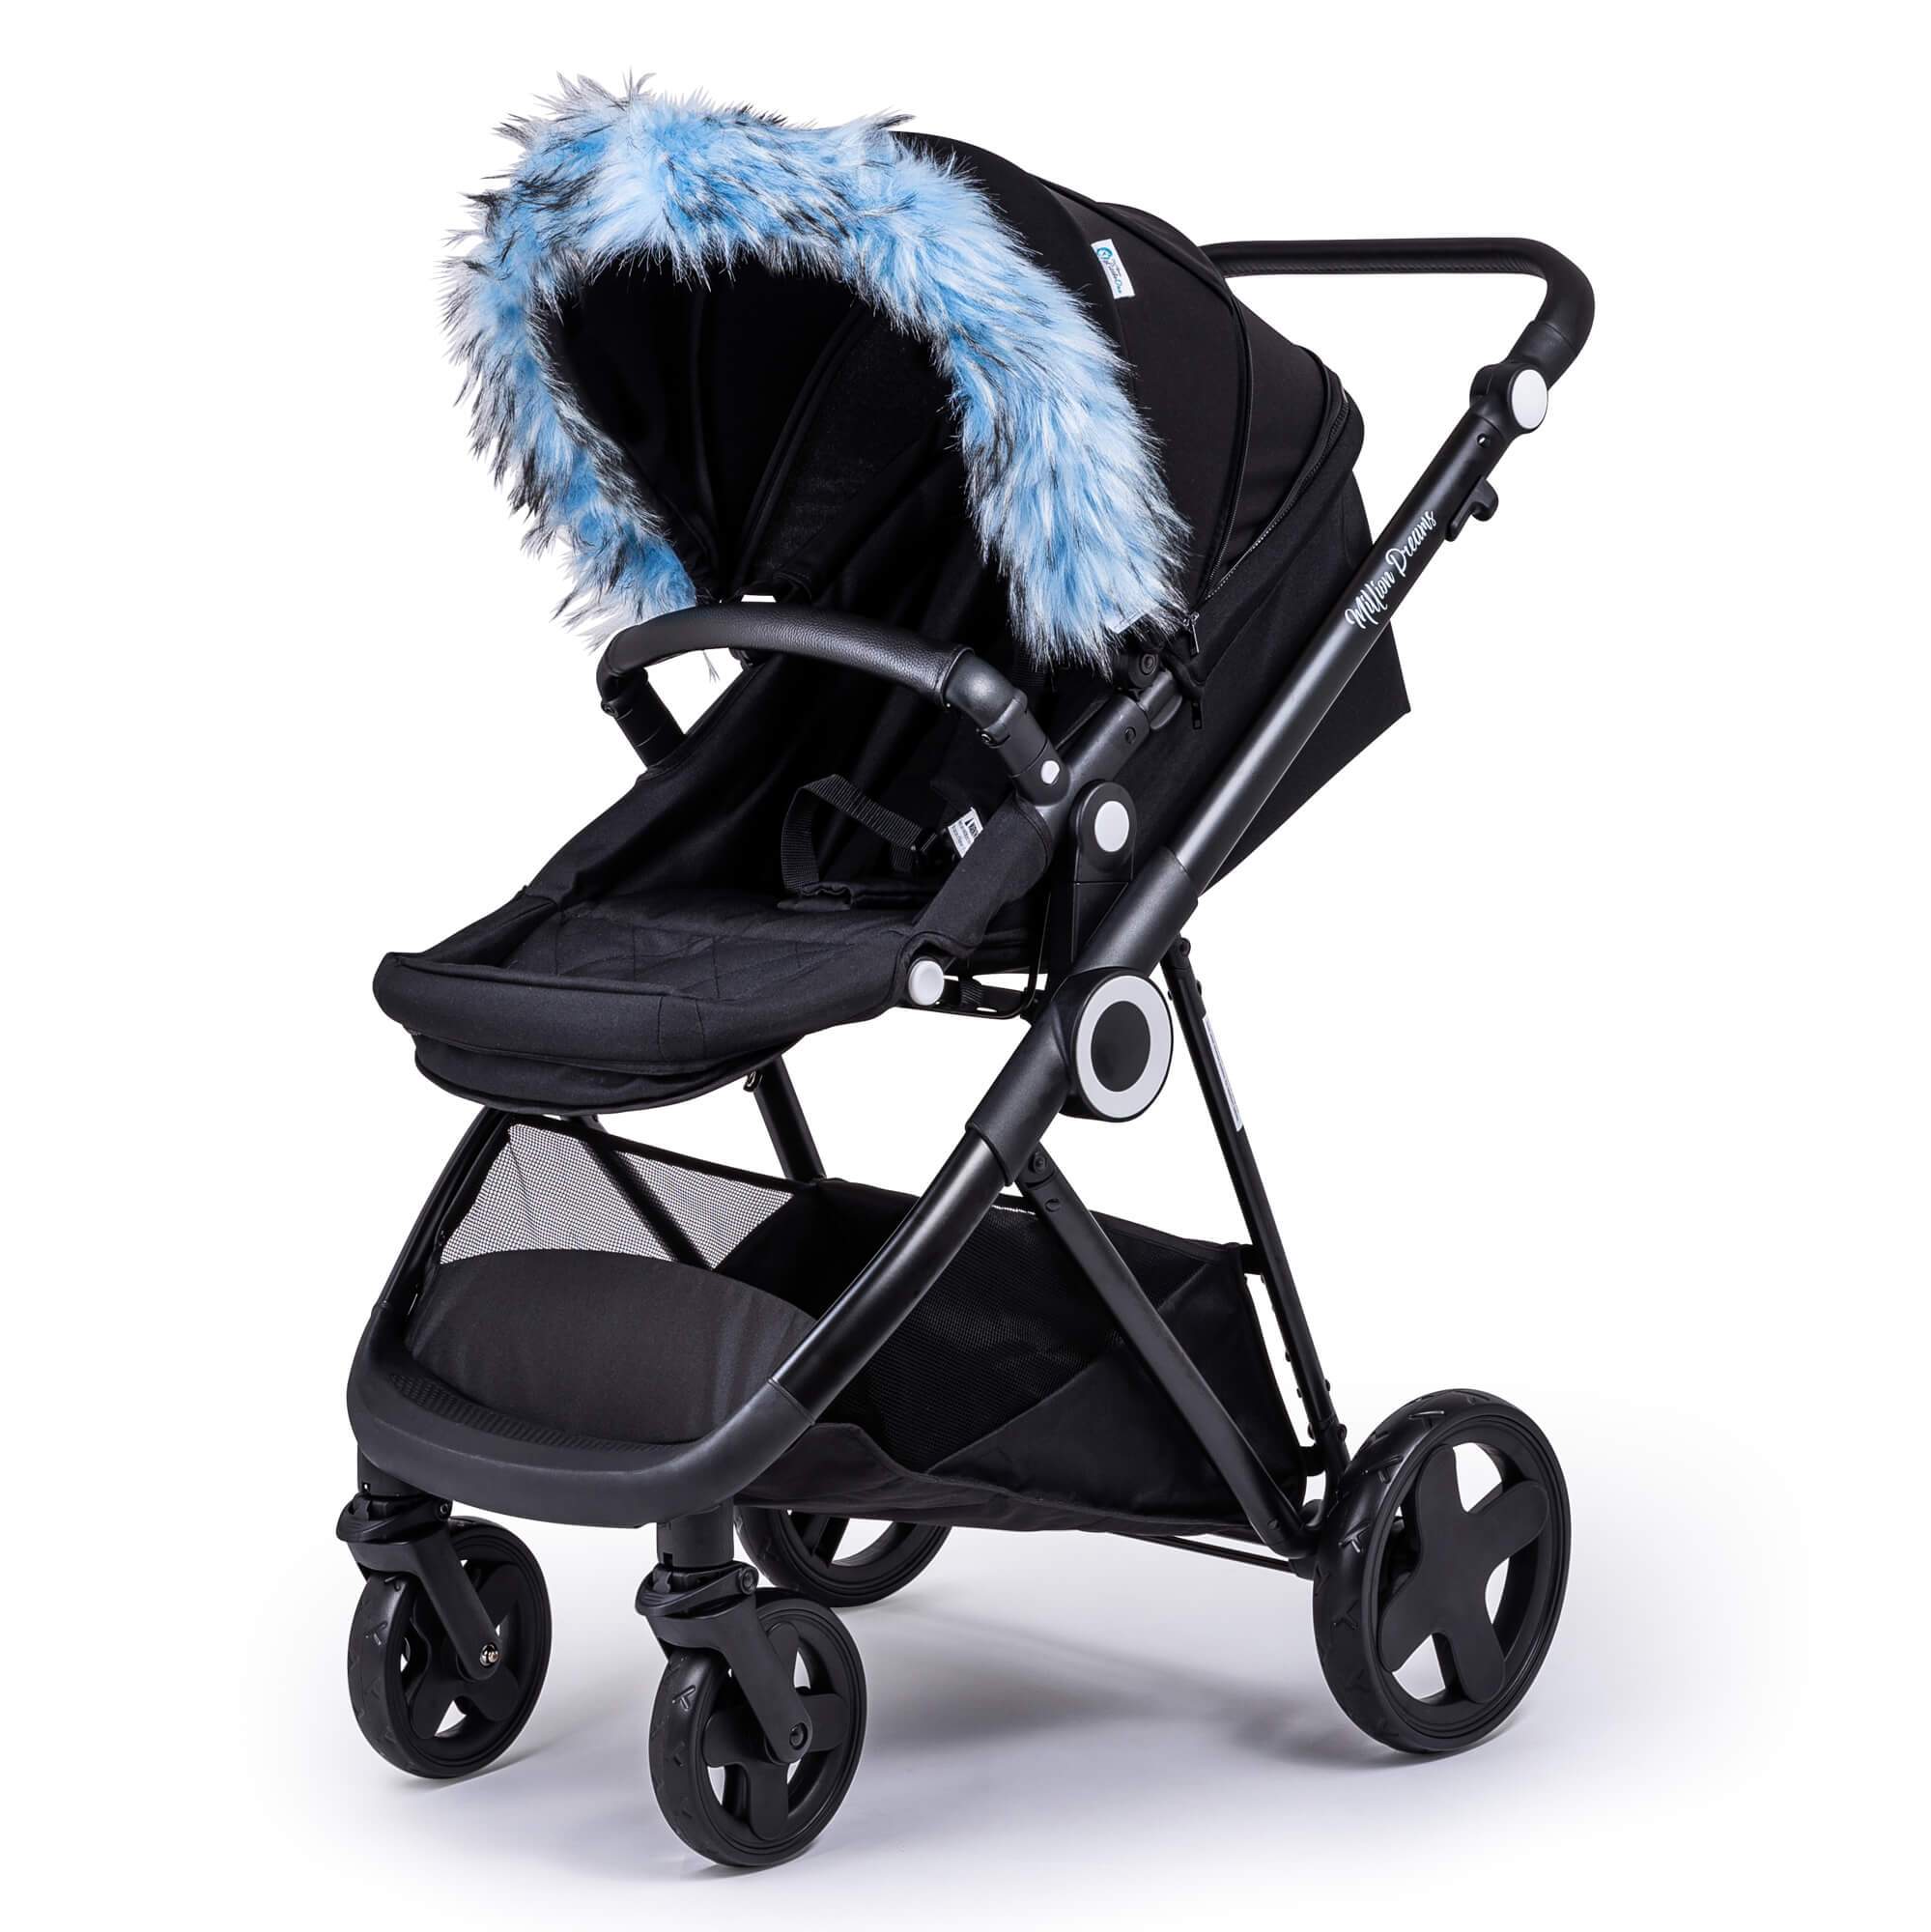 Pram Fur Hood Trim Attachment for Pushchair Compatible with Hartan - For Your Little One